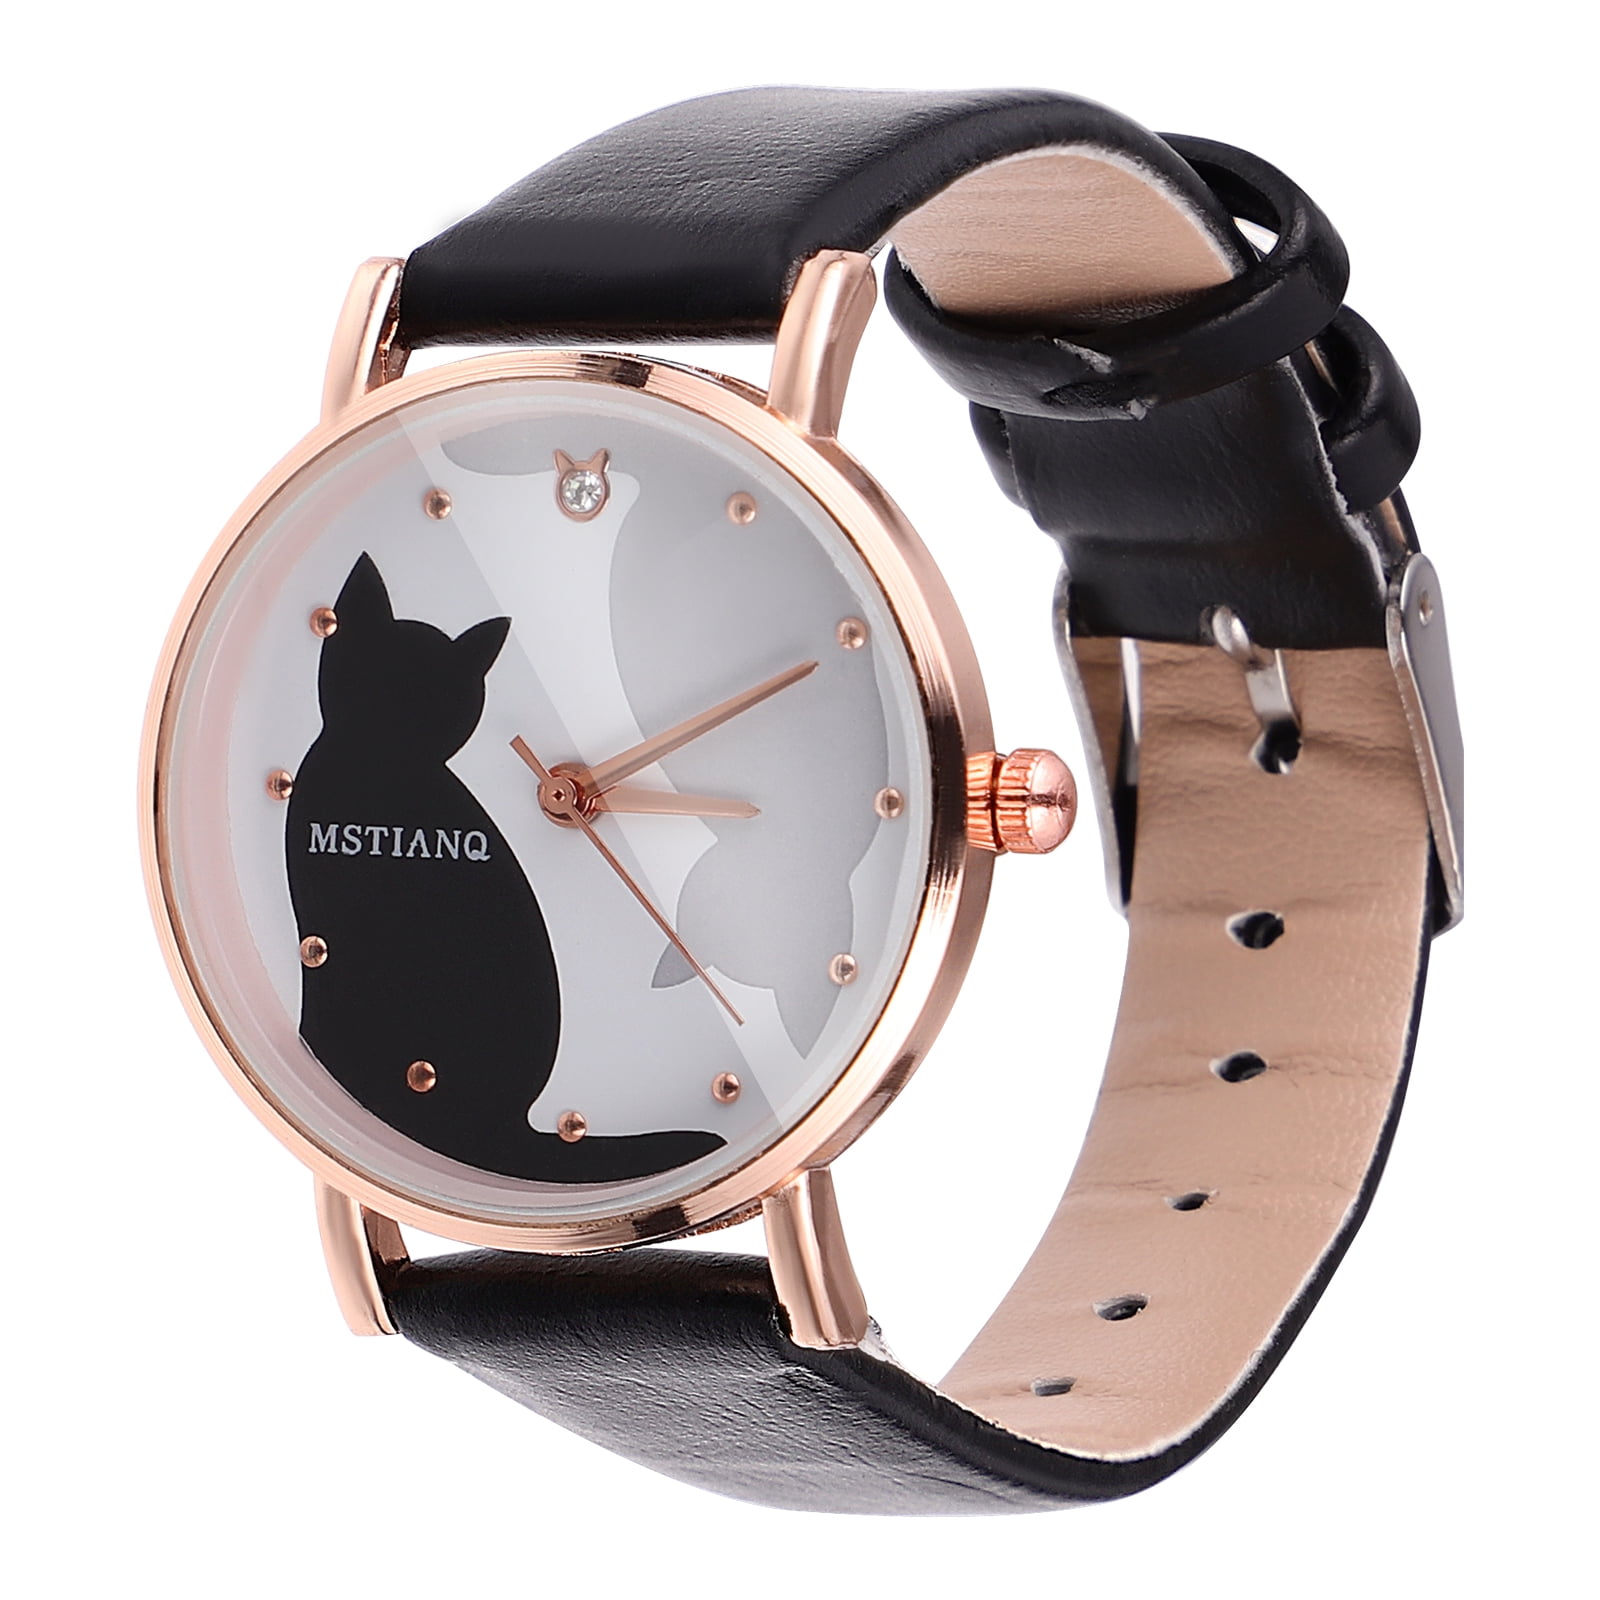 Buy QALIBA Rose Gold Nice Looking Watch Very Pretty Or Attractive Analog  Watch - for Girls Analog Watch - for Girls at Amazon.in